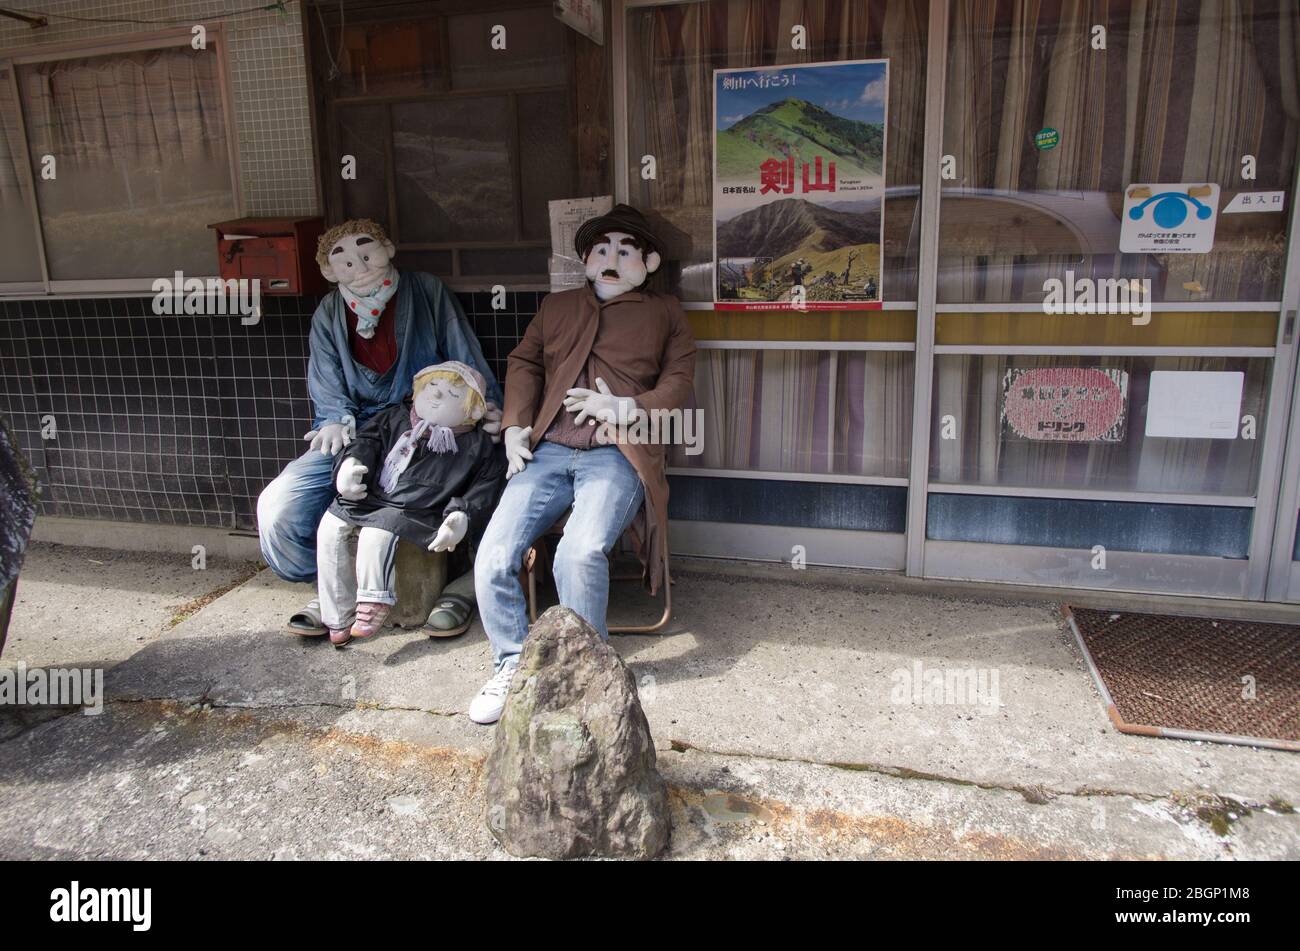 Scarecrows in the 'Valley of Dolls' in Iya Valley where they replace people who left due to rural exodus, Tokushima Prefecture, Shikoku, Japan Stock Photo